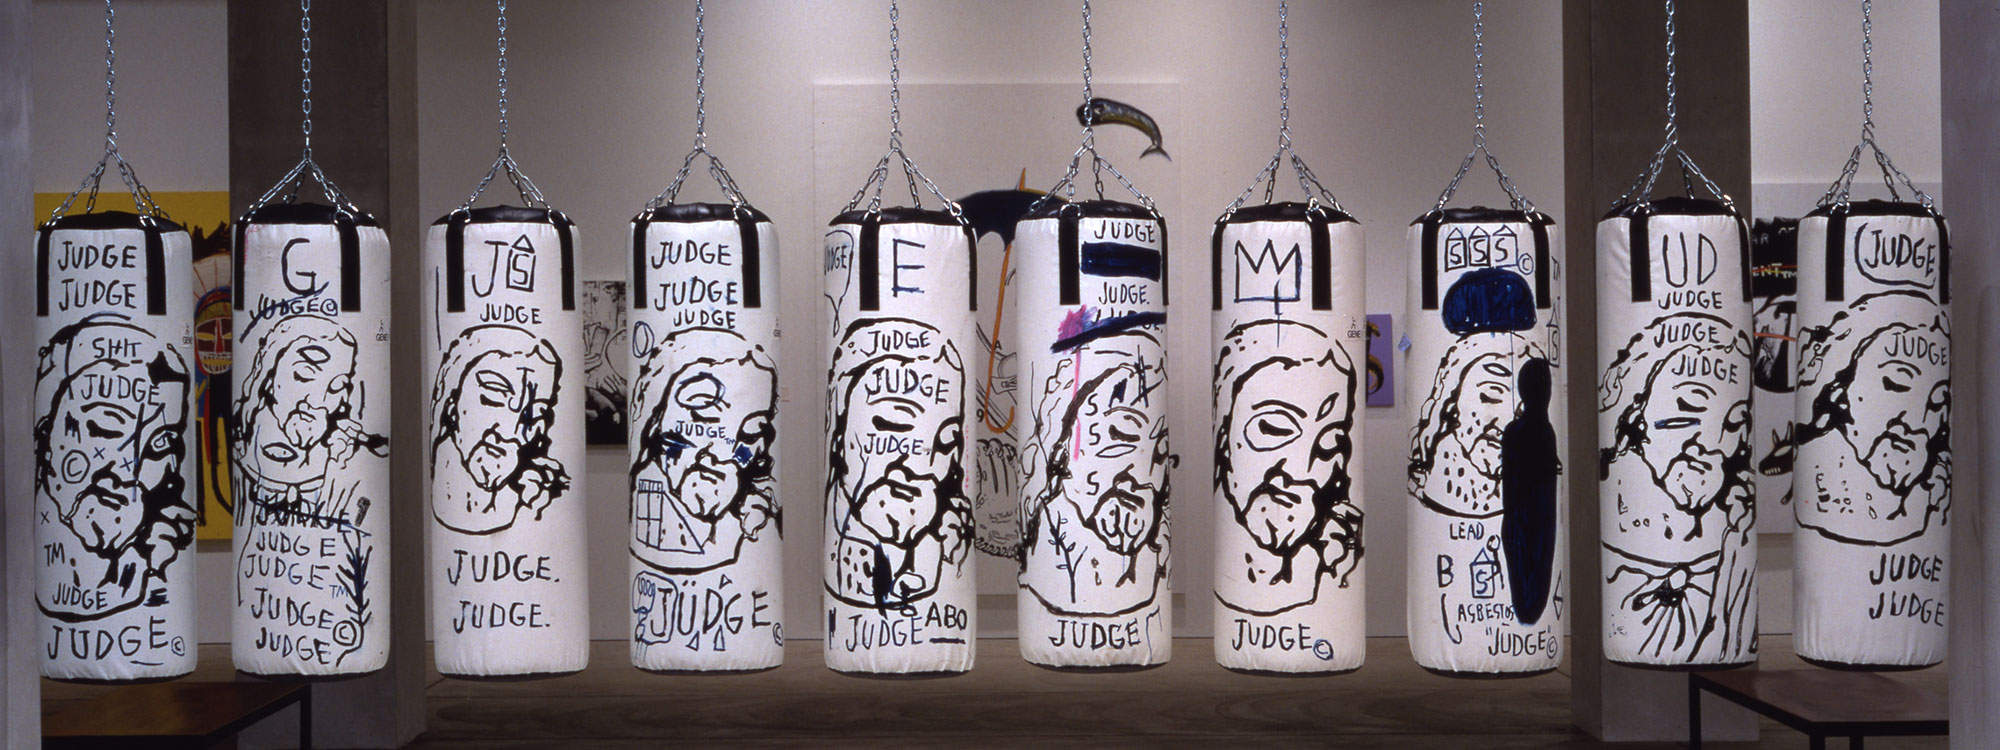 A row of 10 punching bags hanging in a gallery painted with depictions of Jesus